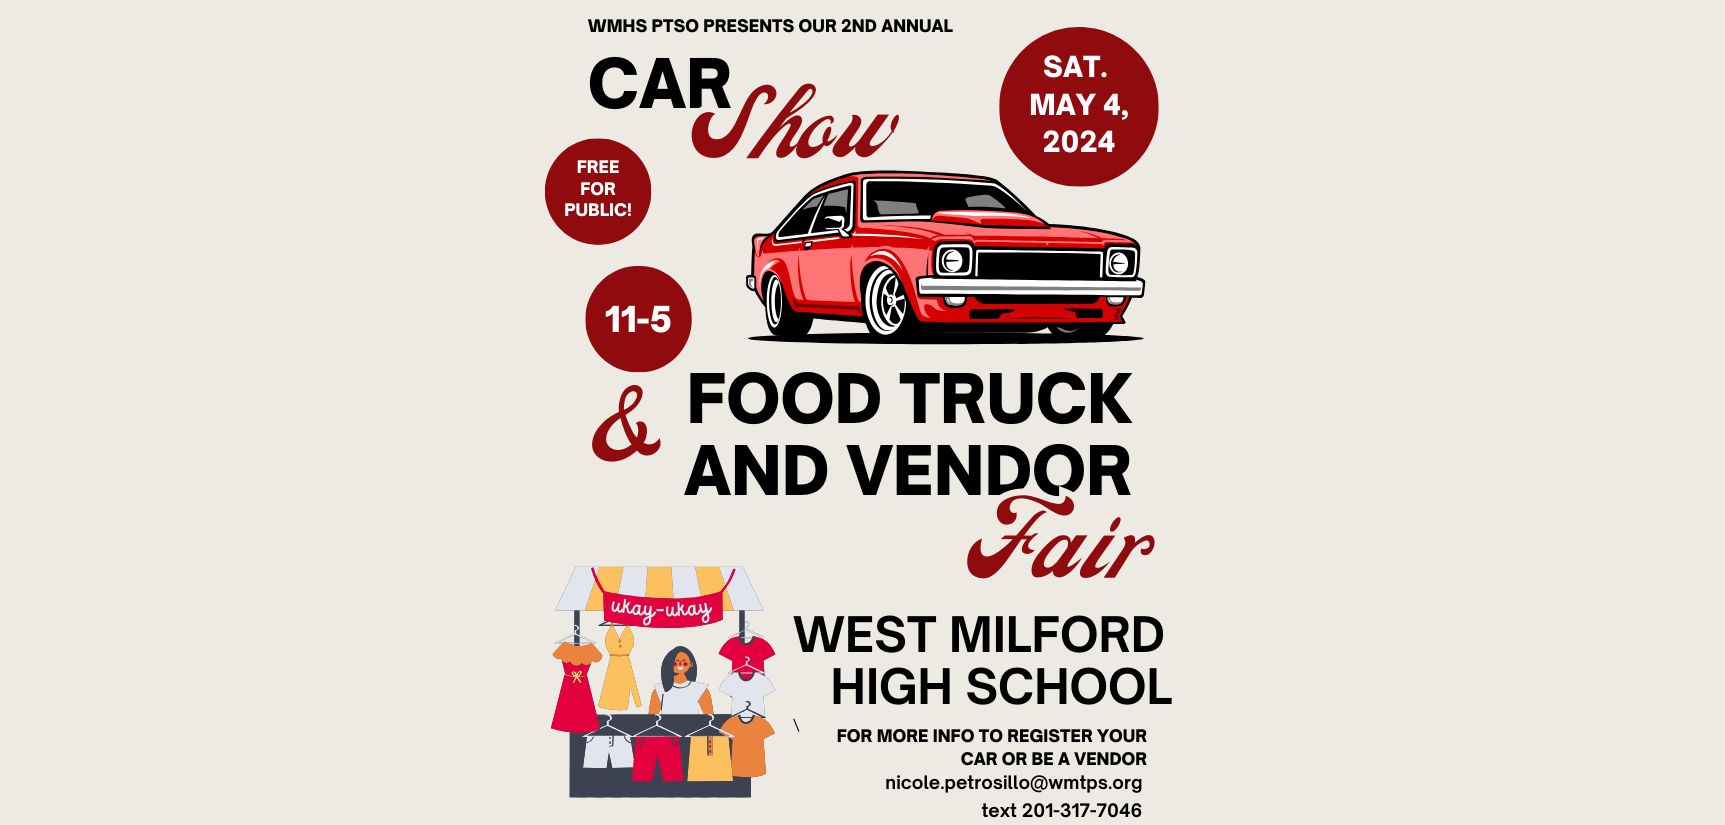 West Milford High School 2nd Annual Vendor Fair, Food Truck Festival, and Car Show, West Milford, New Jersey, United States